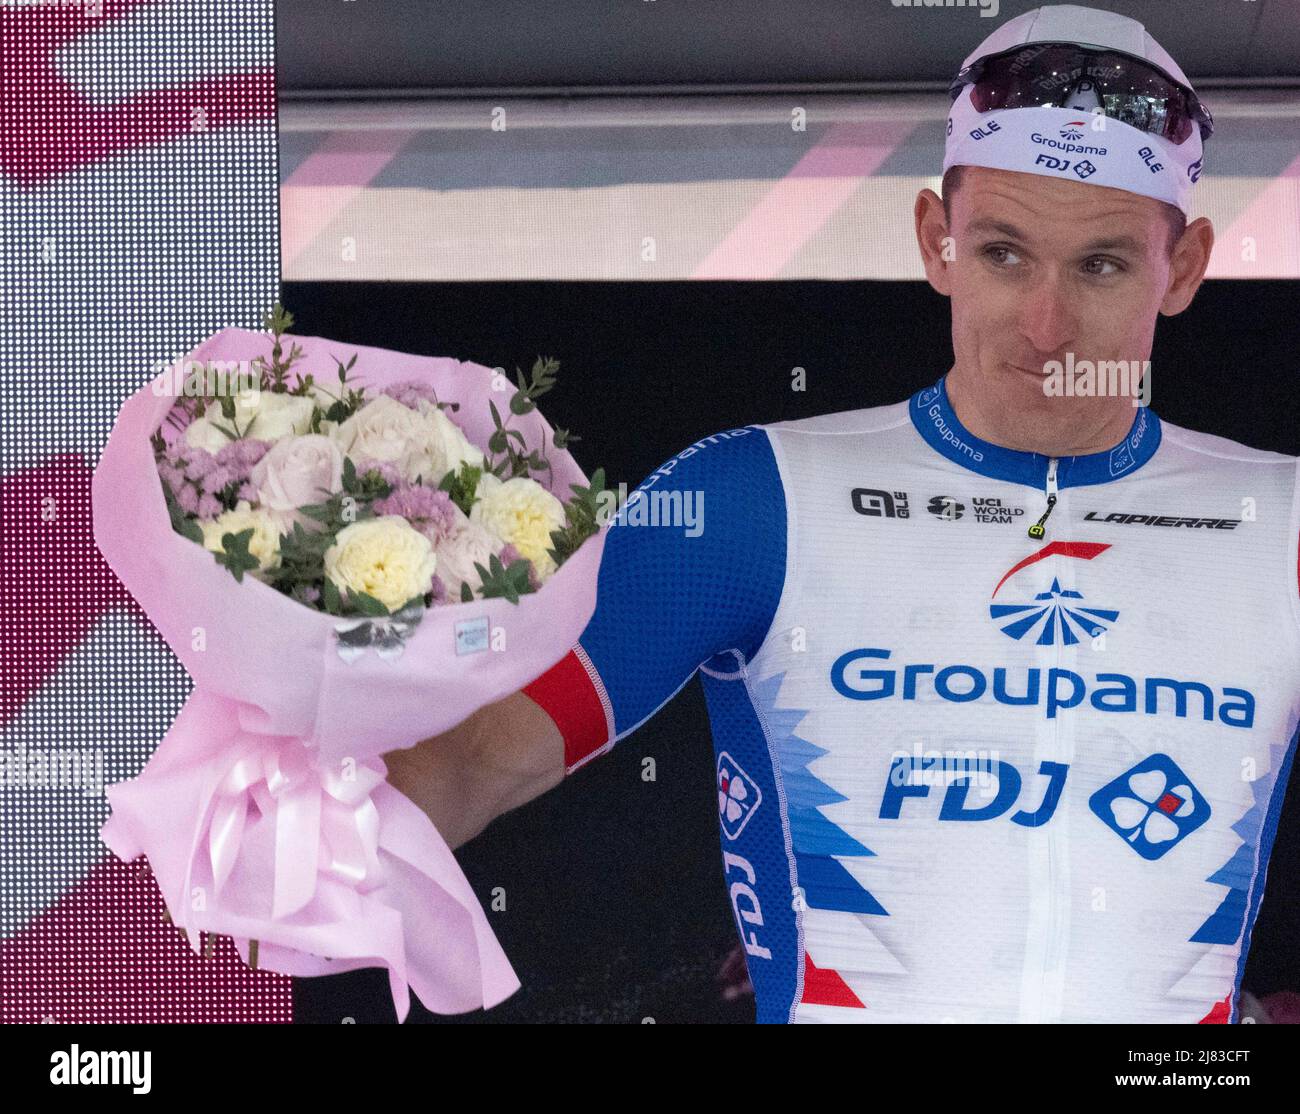 May 12, 2022, SCALEA, ITALY: French rider Arnaud Demare of Groupama - FDJ  celebrates oh the podium after winning the sixth stage of the 105th Giro  d'Italia cycling tour, a race of